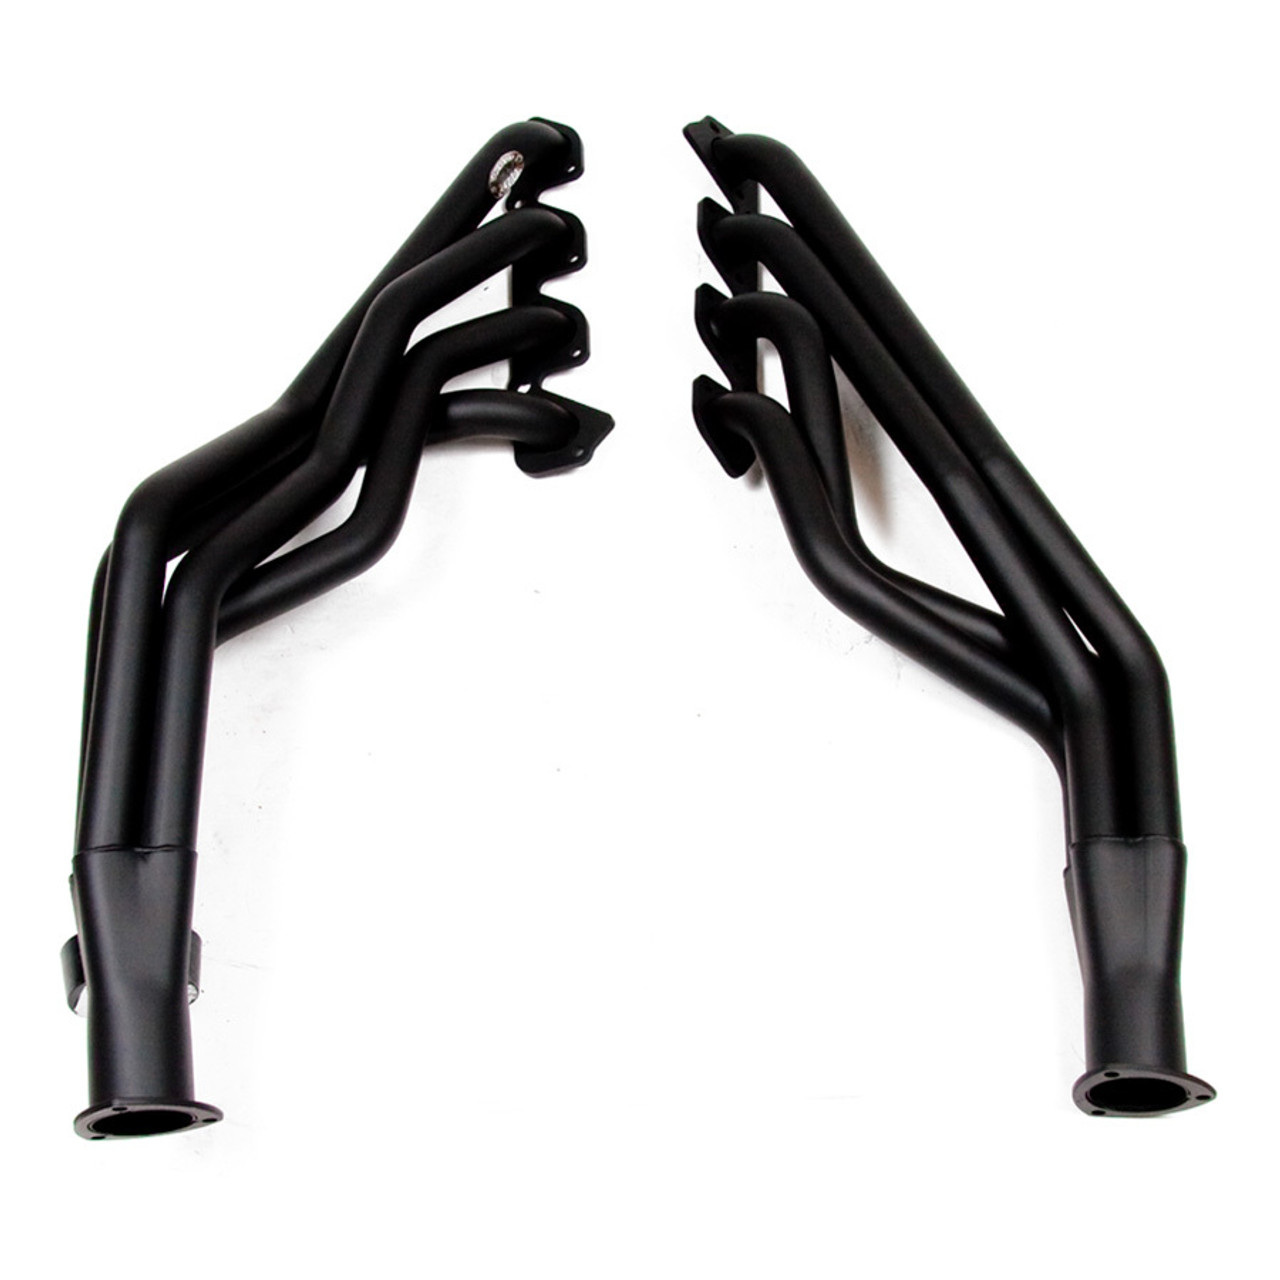 70-71 Ford 351C Headers